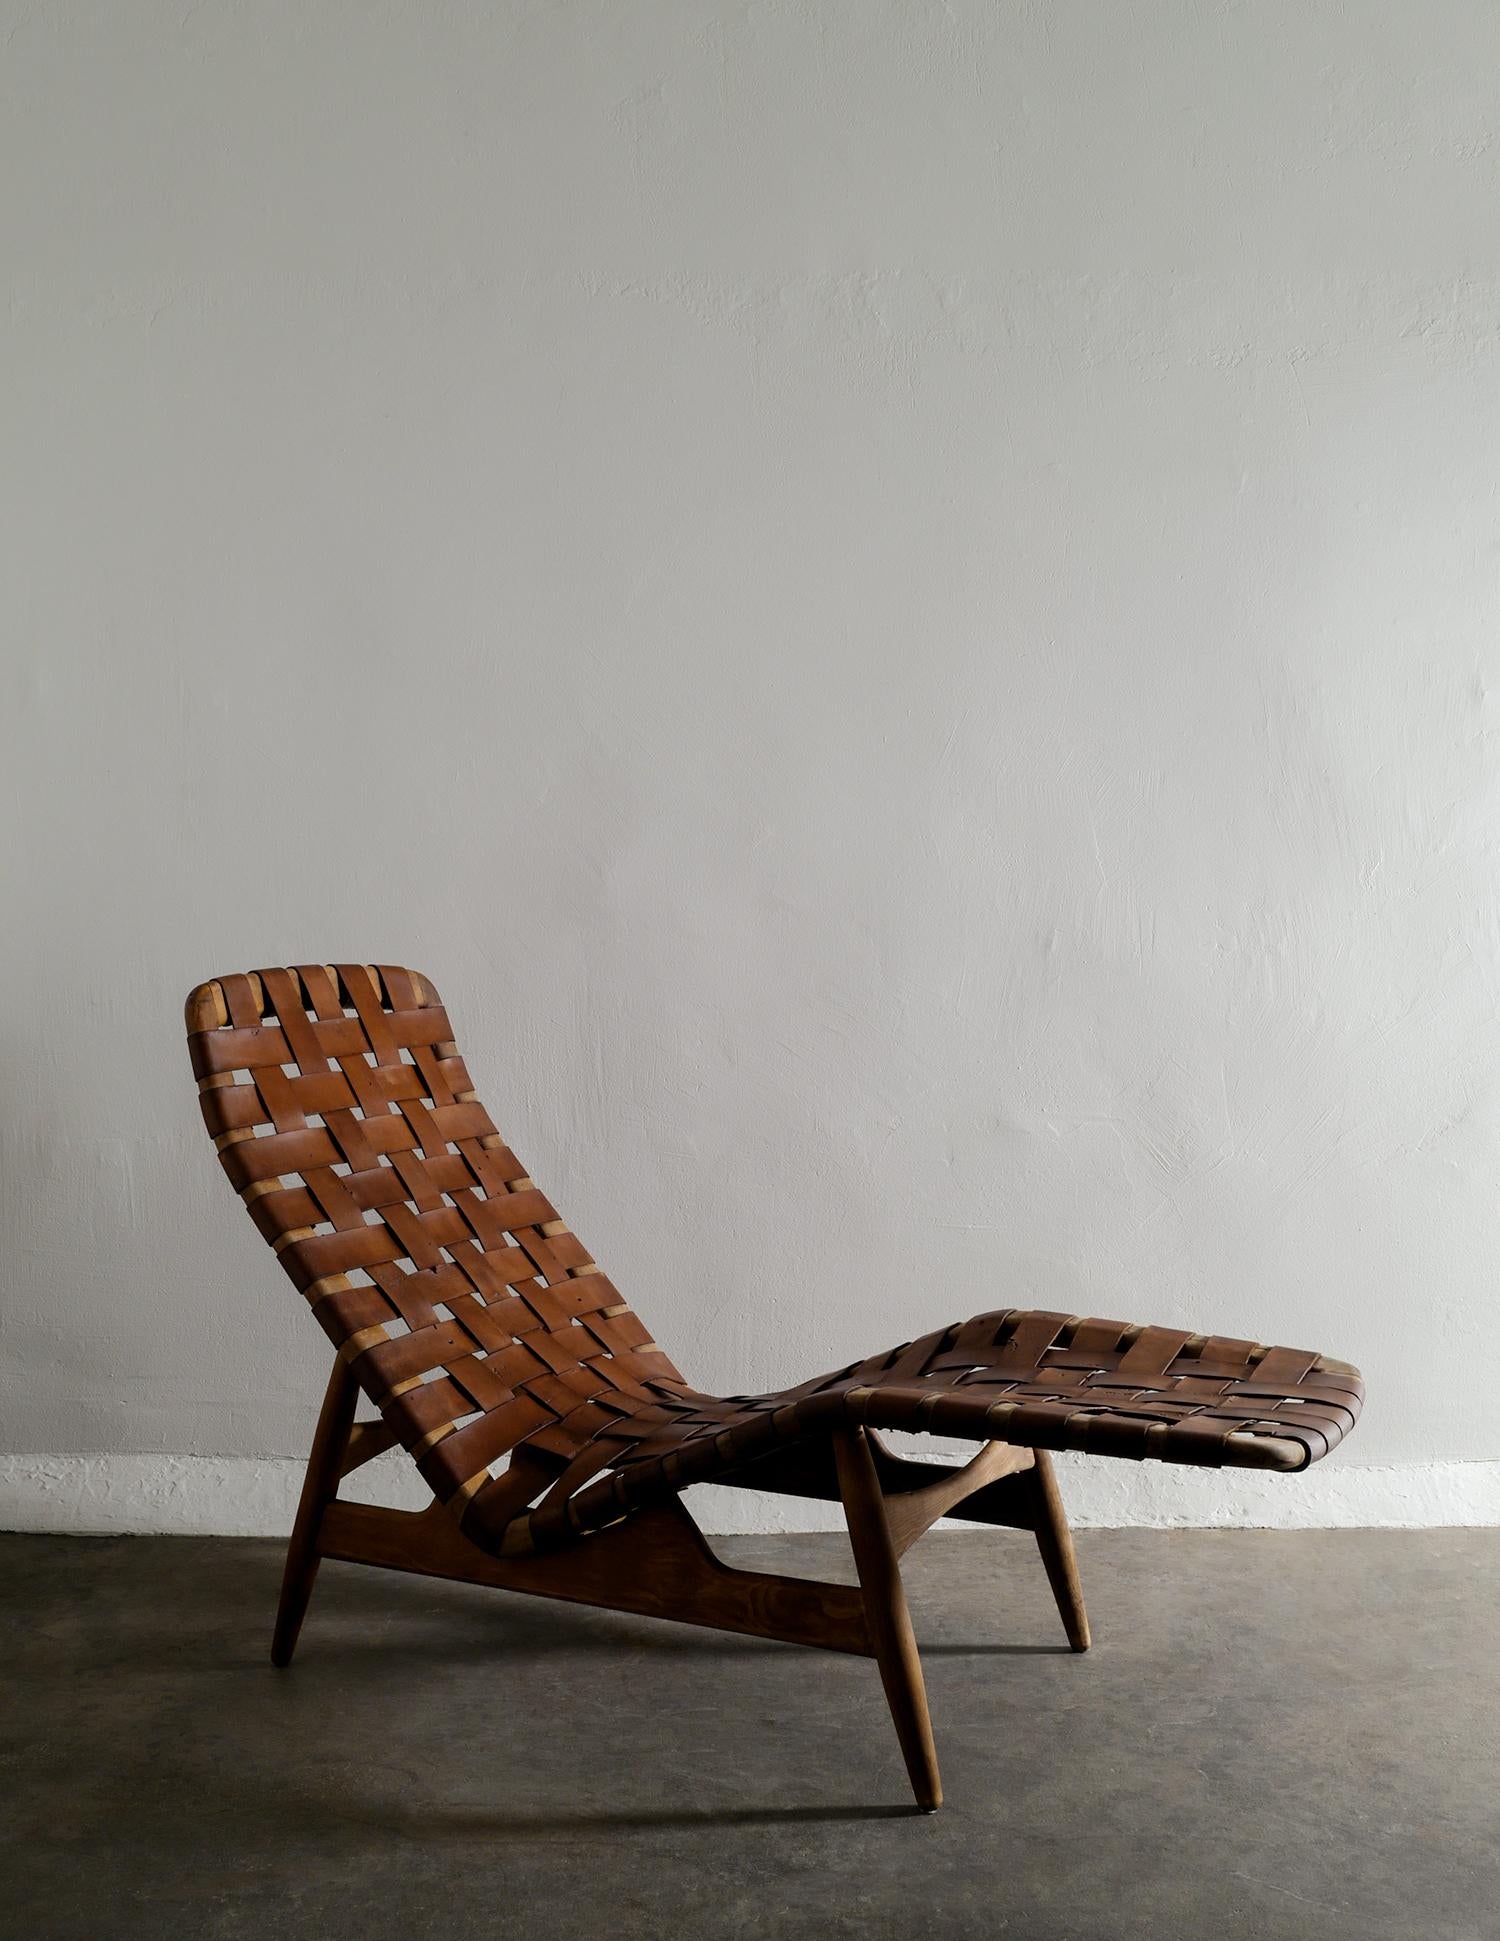 Very rare chaise lounge chair in ash and brown leather designed by Arne Vodder in the 1950s produced by Bovirke, Denmark. In good vintage condition with signs and patina from age and use. 

Dimensions: H: 94 cm W: 145 cm D: 58 cm SH: 33 cm.